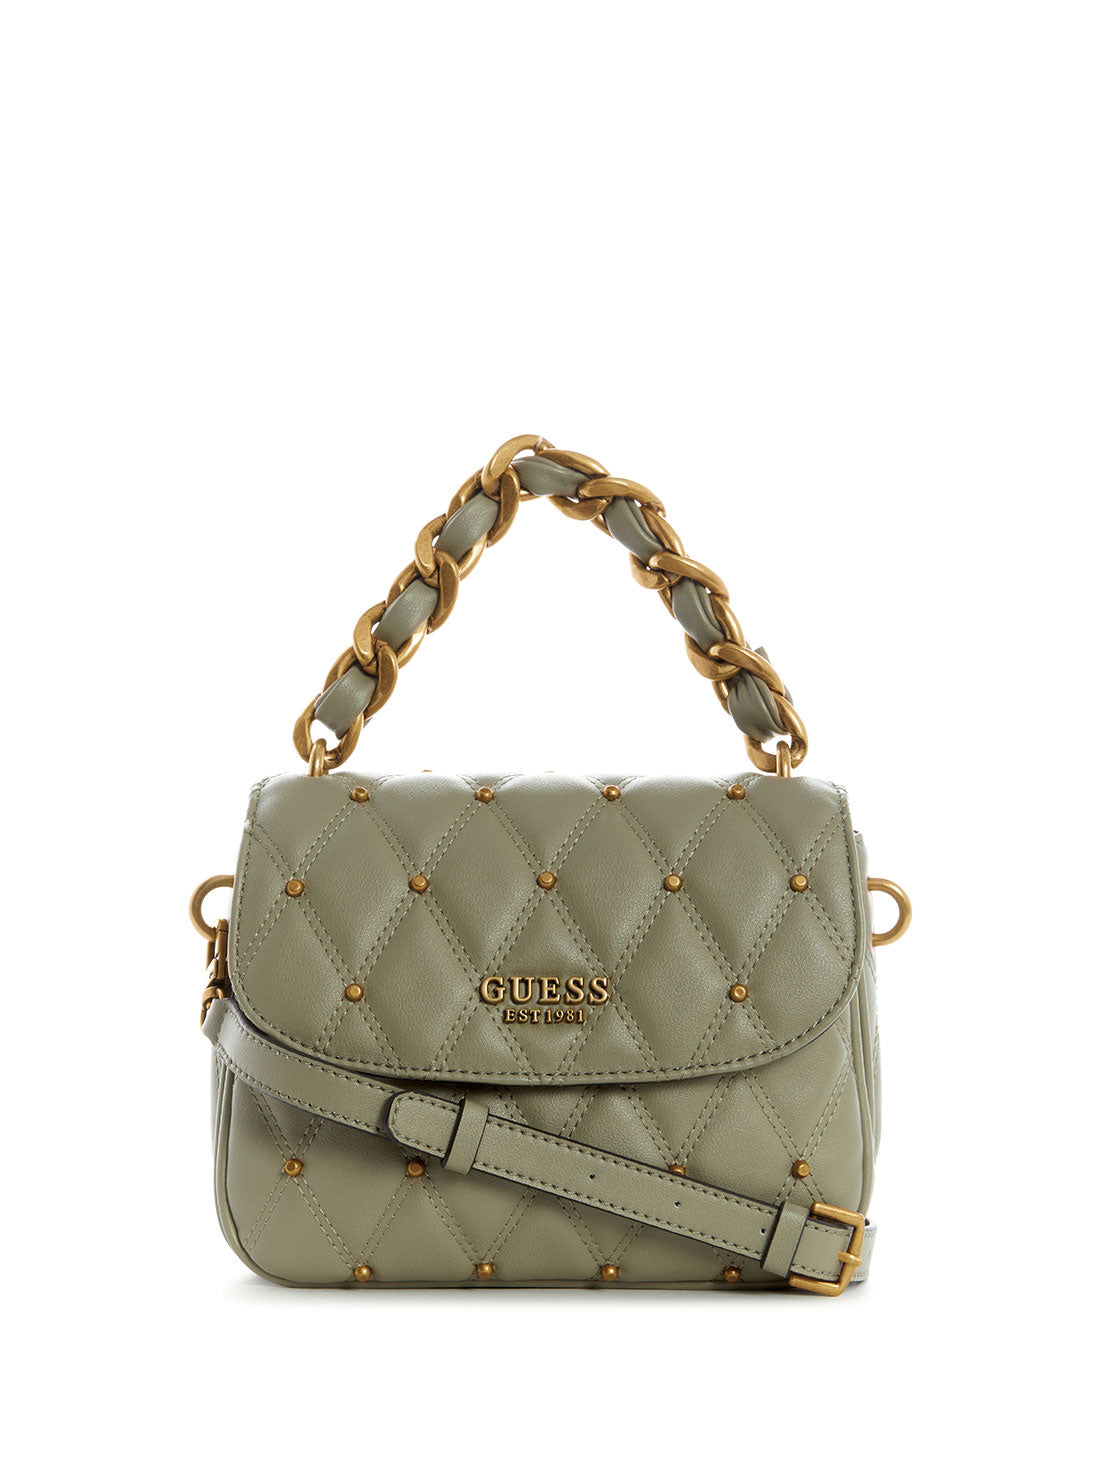 GUESS Womens Sage Triana Studded Shoulder Bag QS855319 Front View